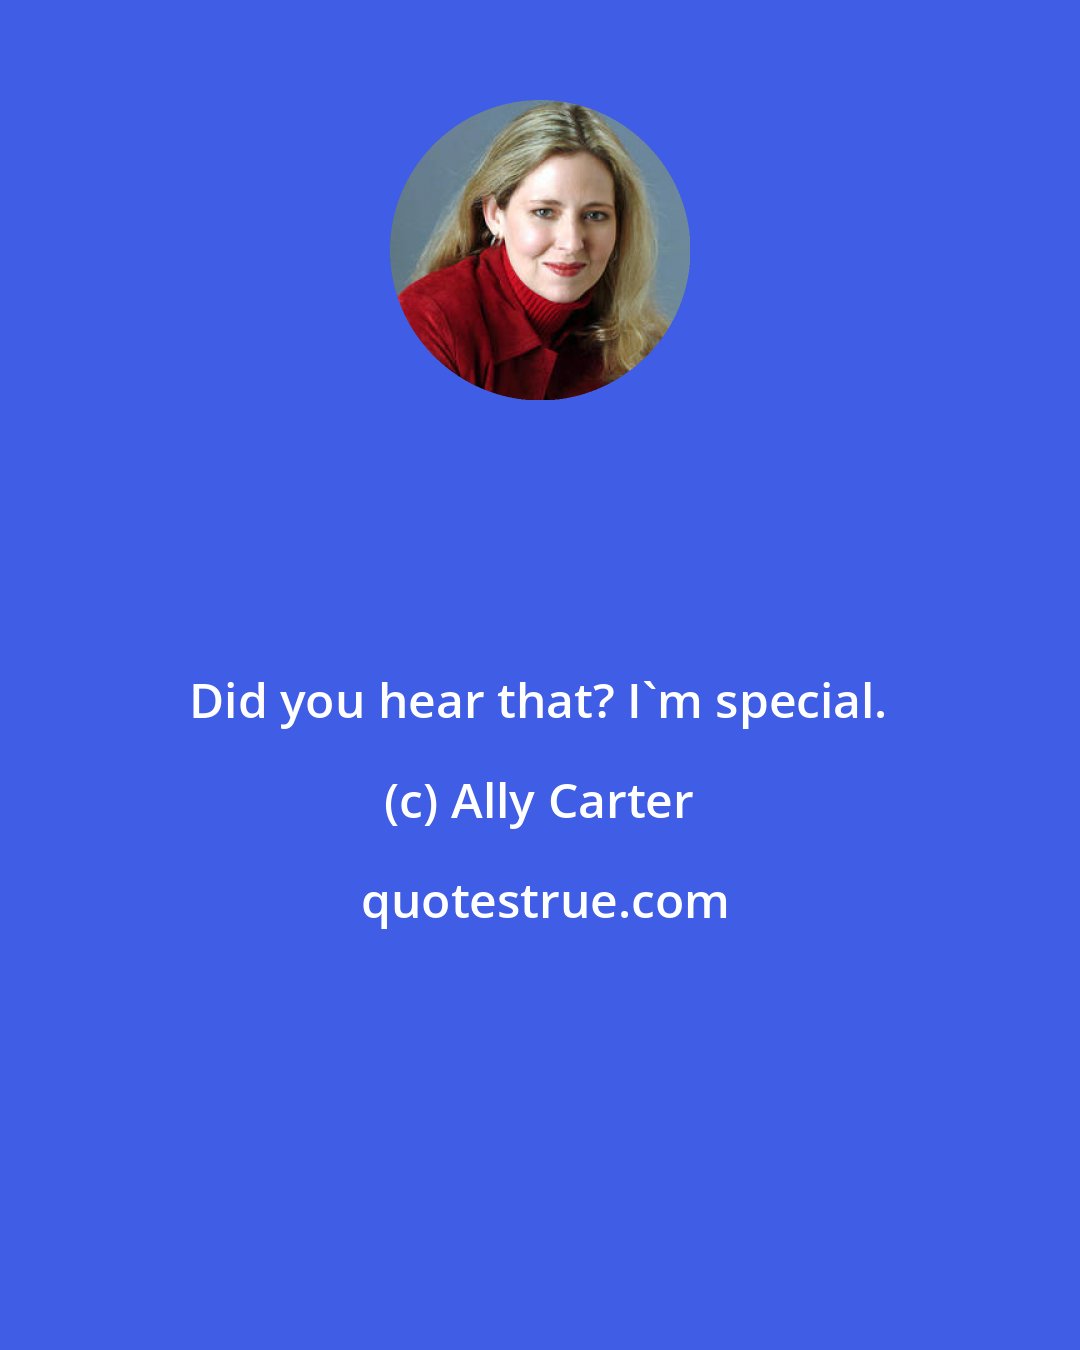 Ally Carter: Did you hear that? I'm special.